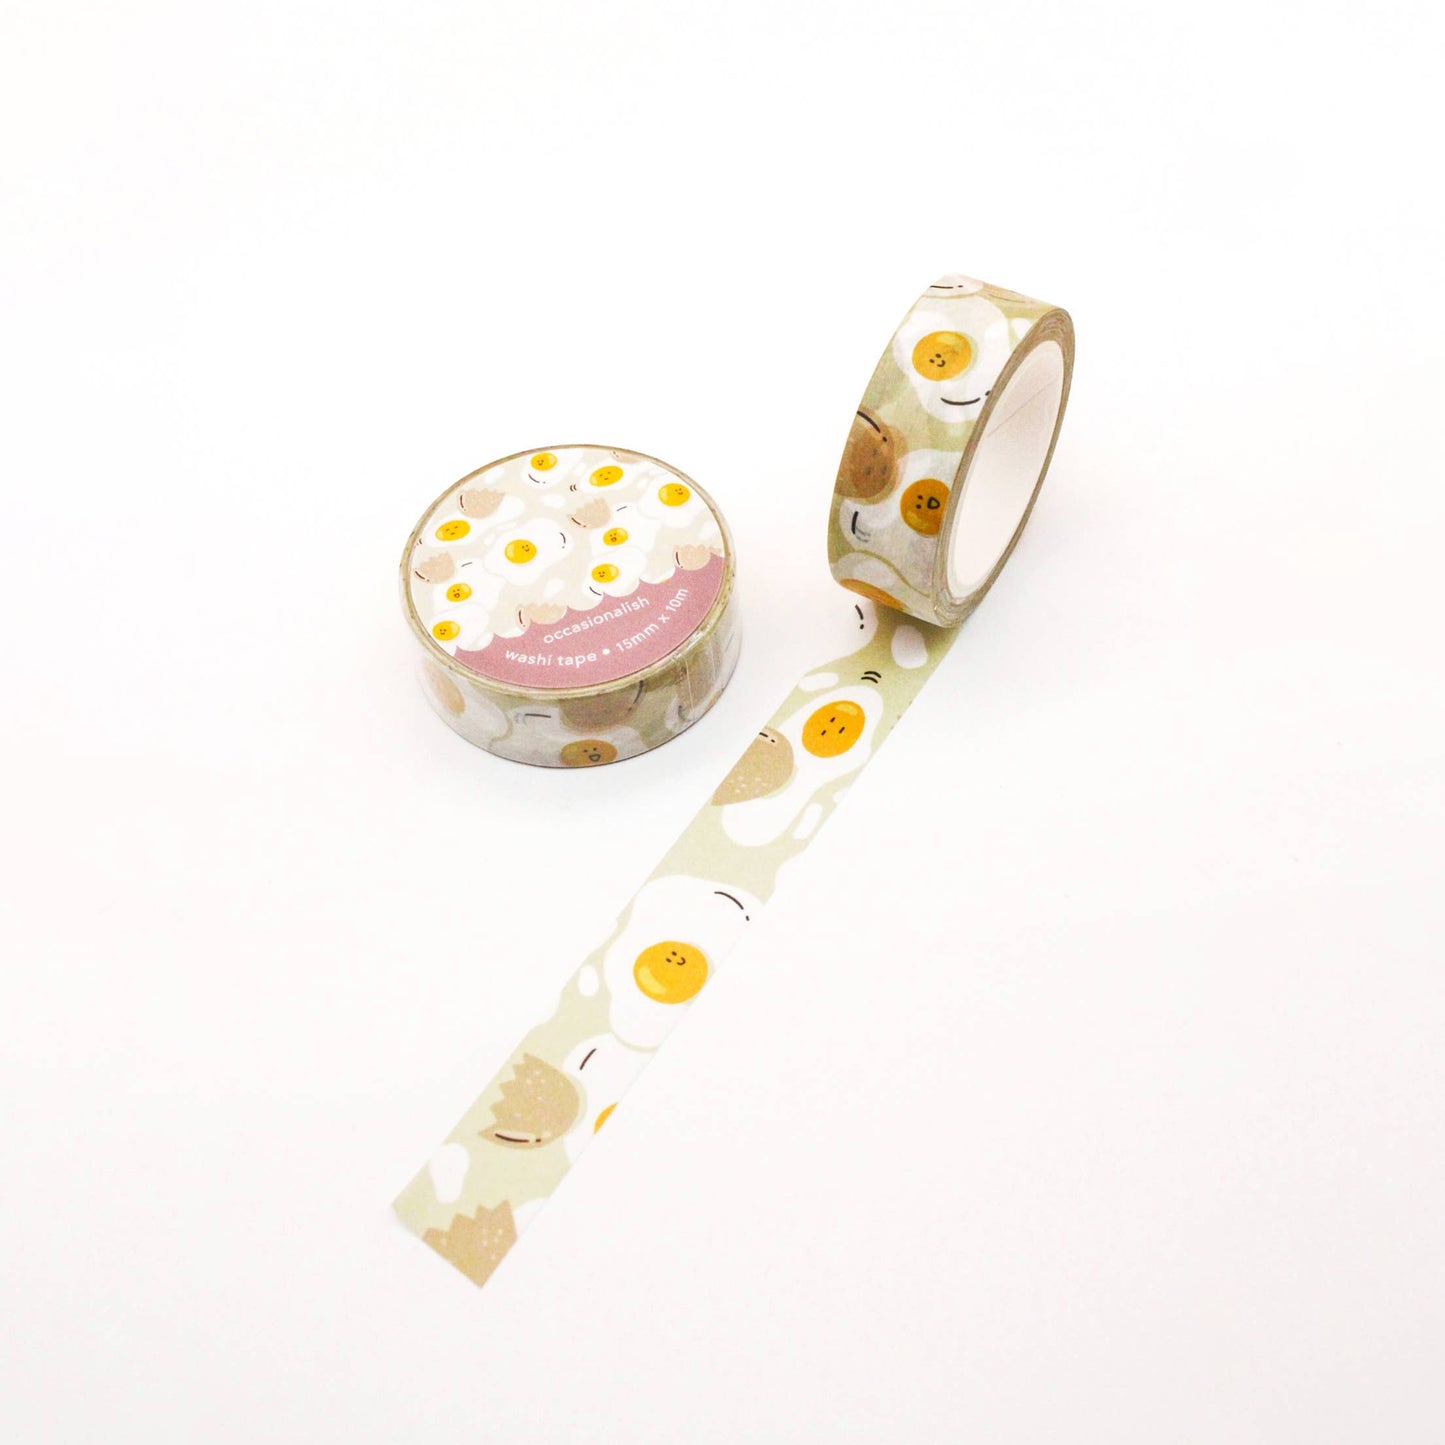 Sunny side up washi tape with assorted eggs and cracked egg shells.